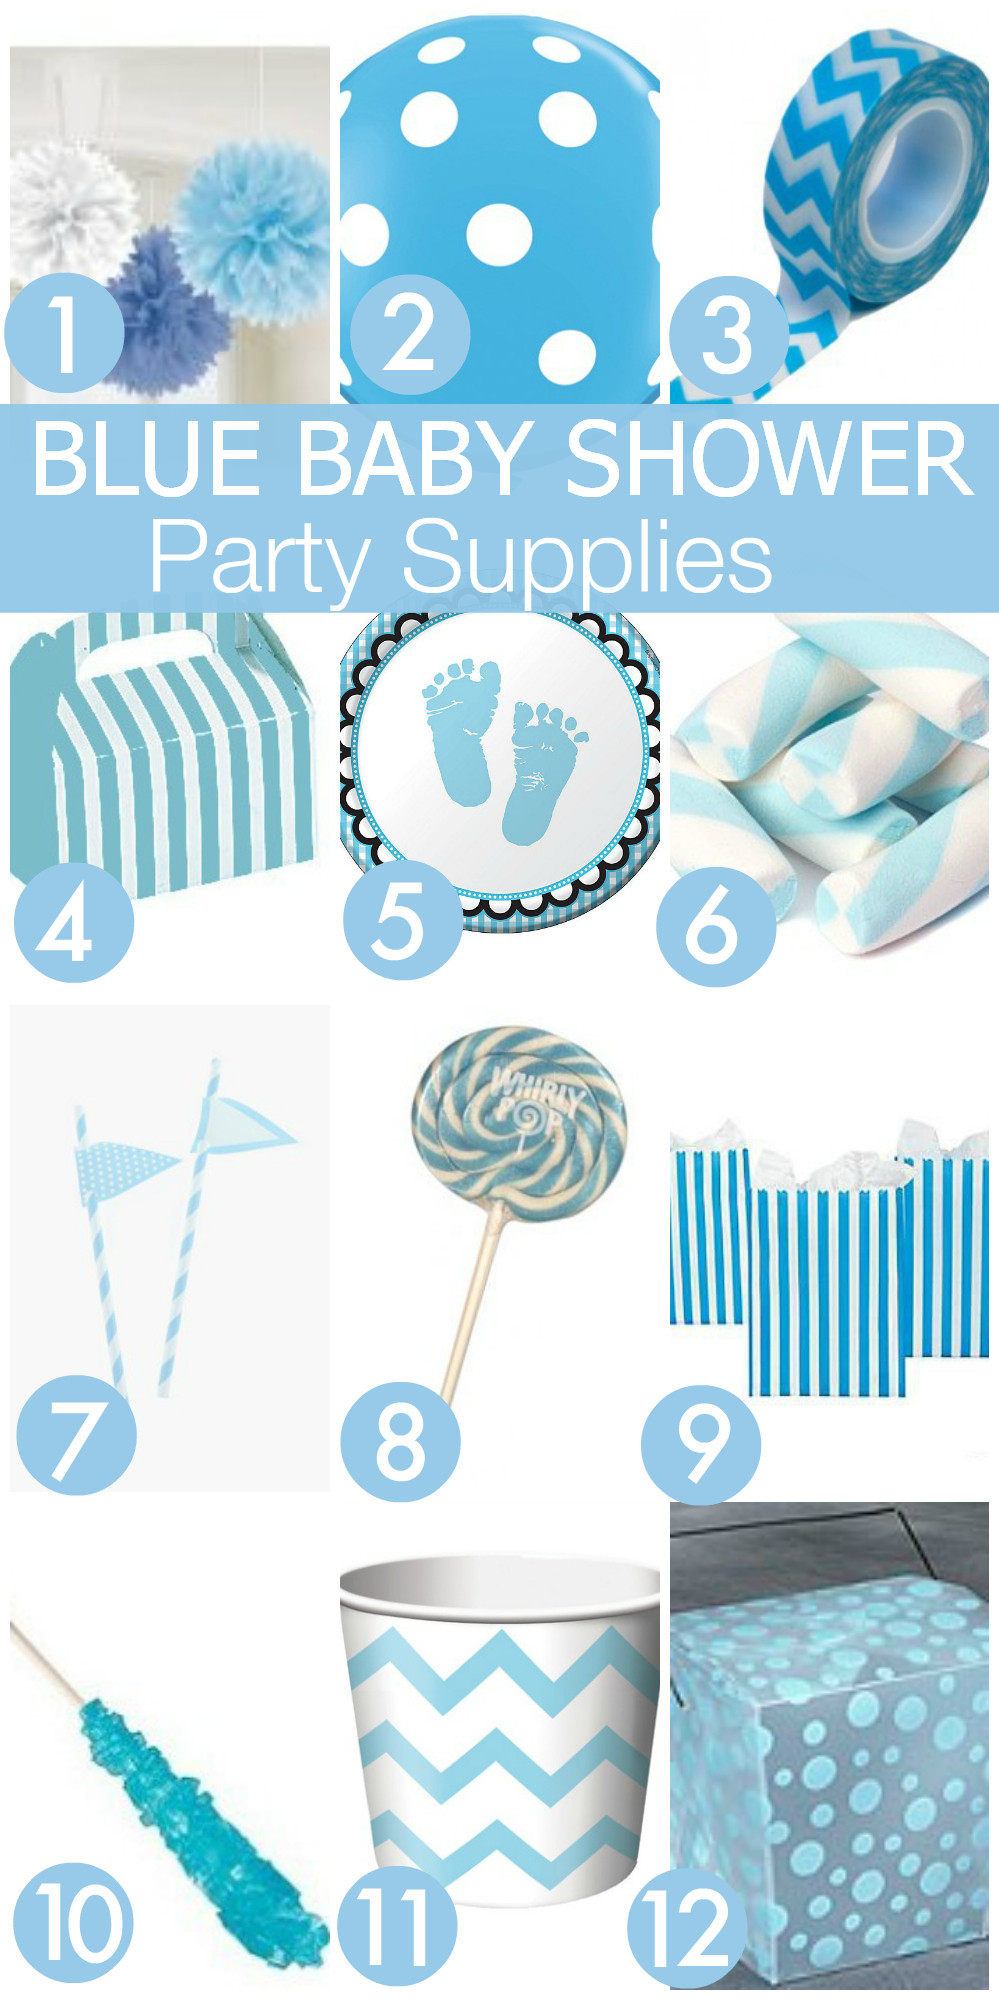 Baby Shower Party Packs
 7 Must Haves for Your Blue Baby Shower